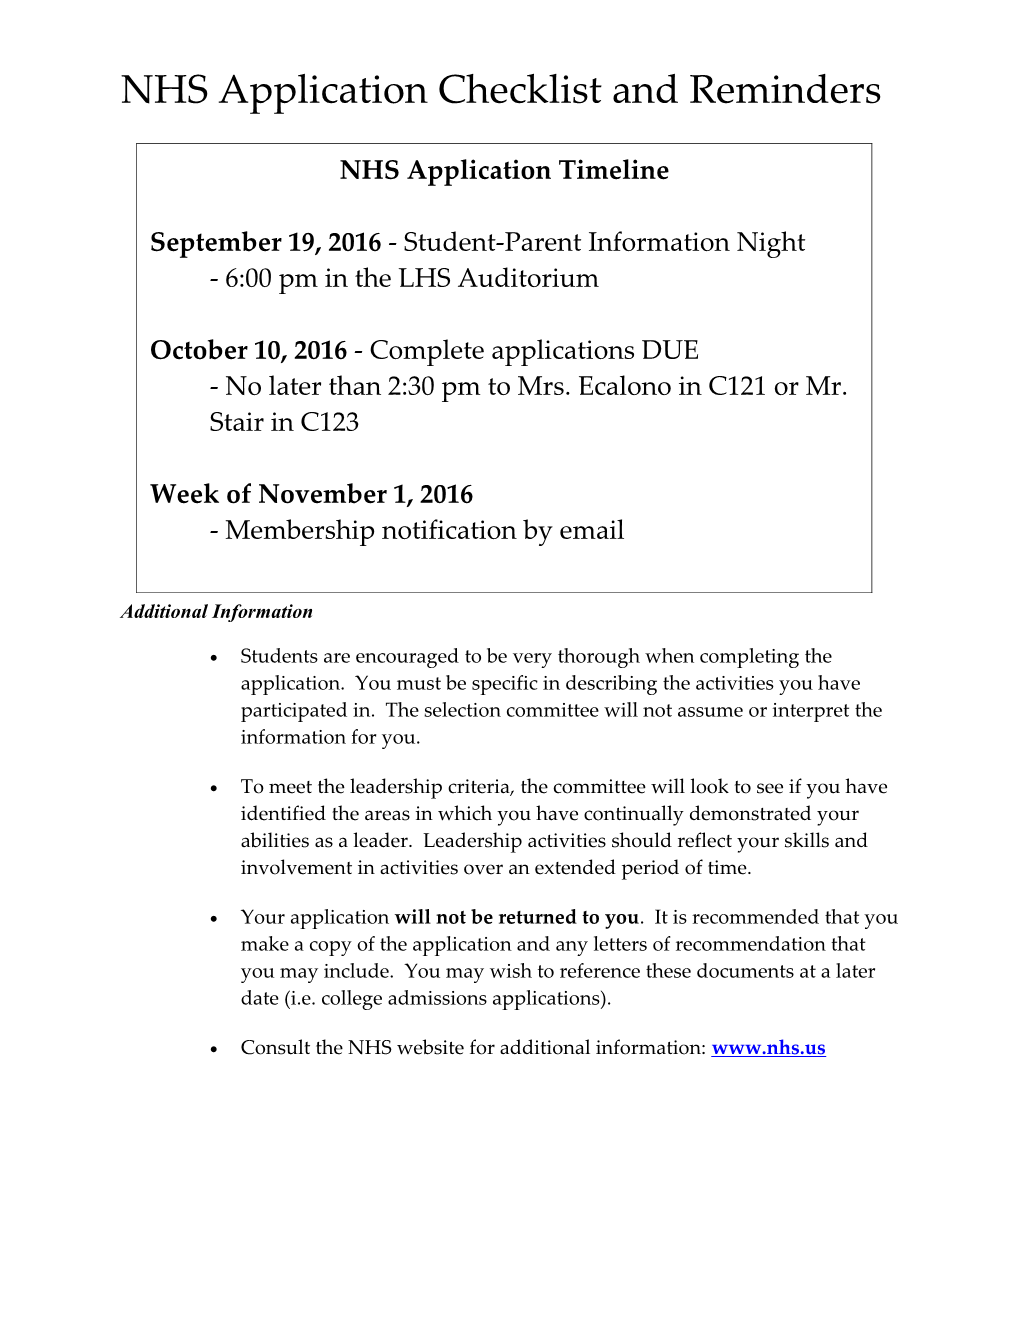 NHS Application Checklist and Reminders